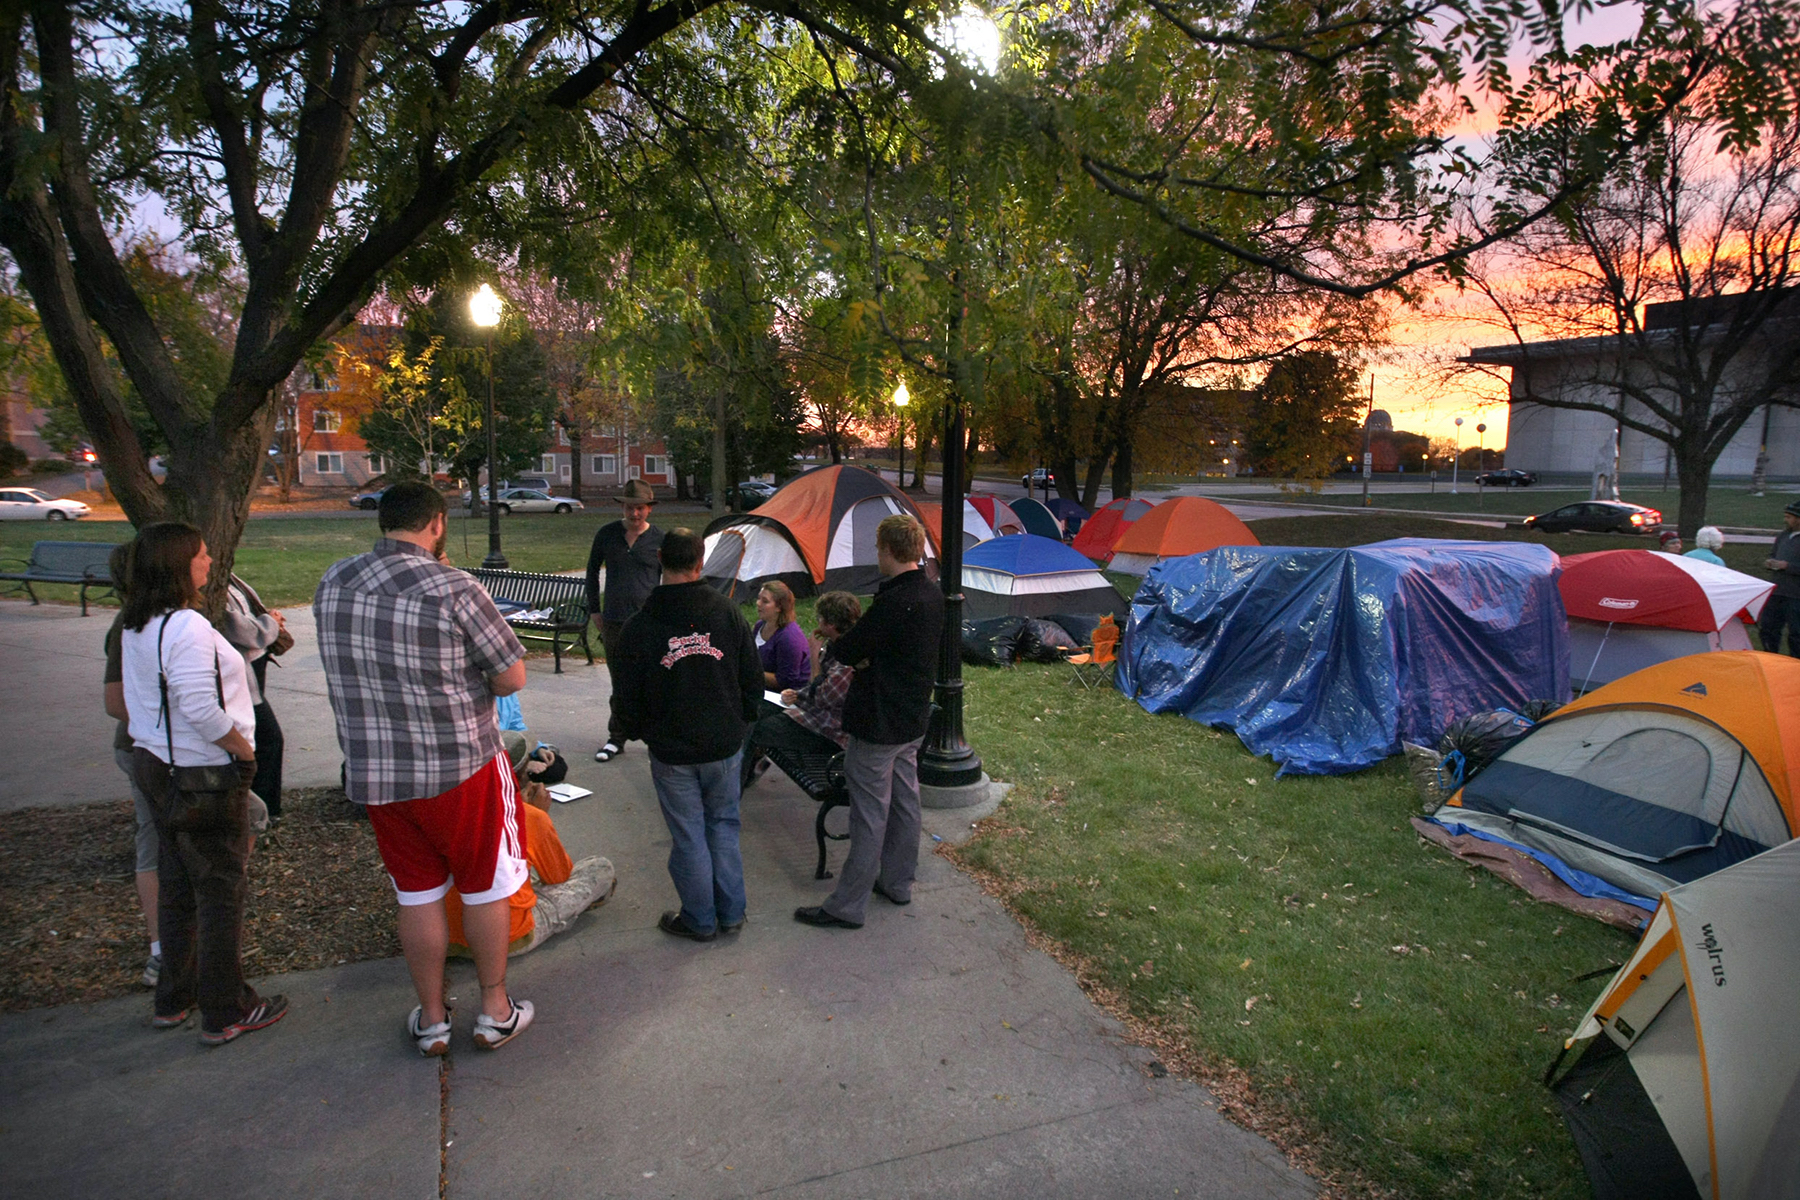 A photo of a small circle of people on the left, a large green lawn with tents on the right